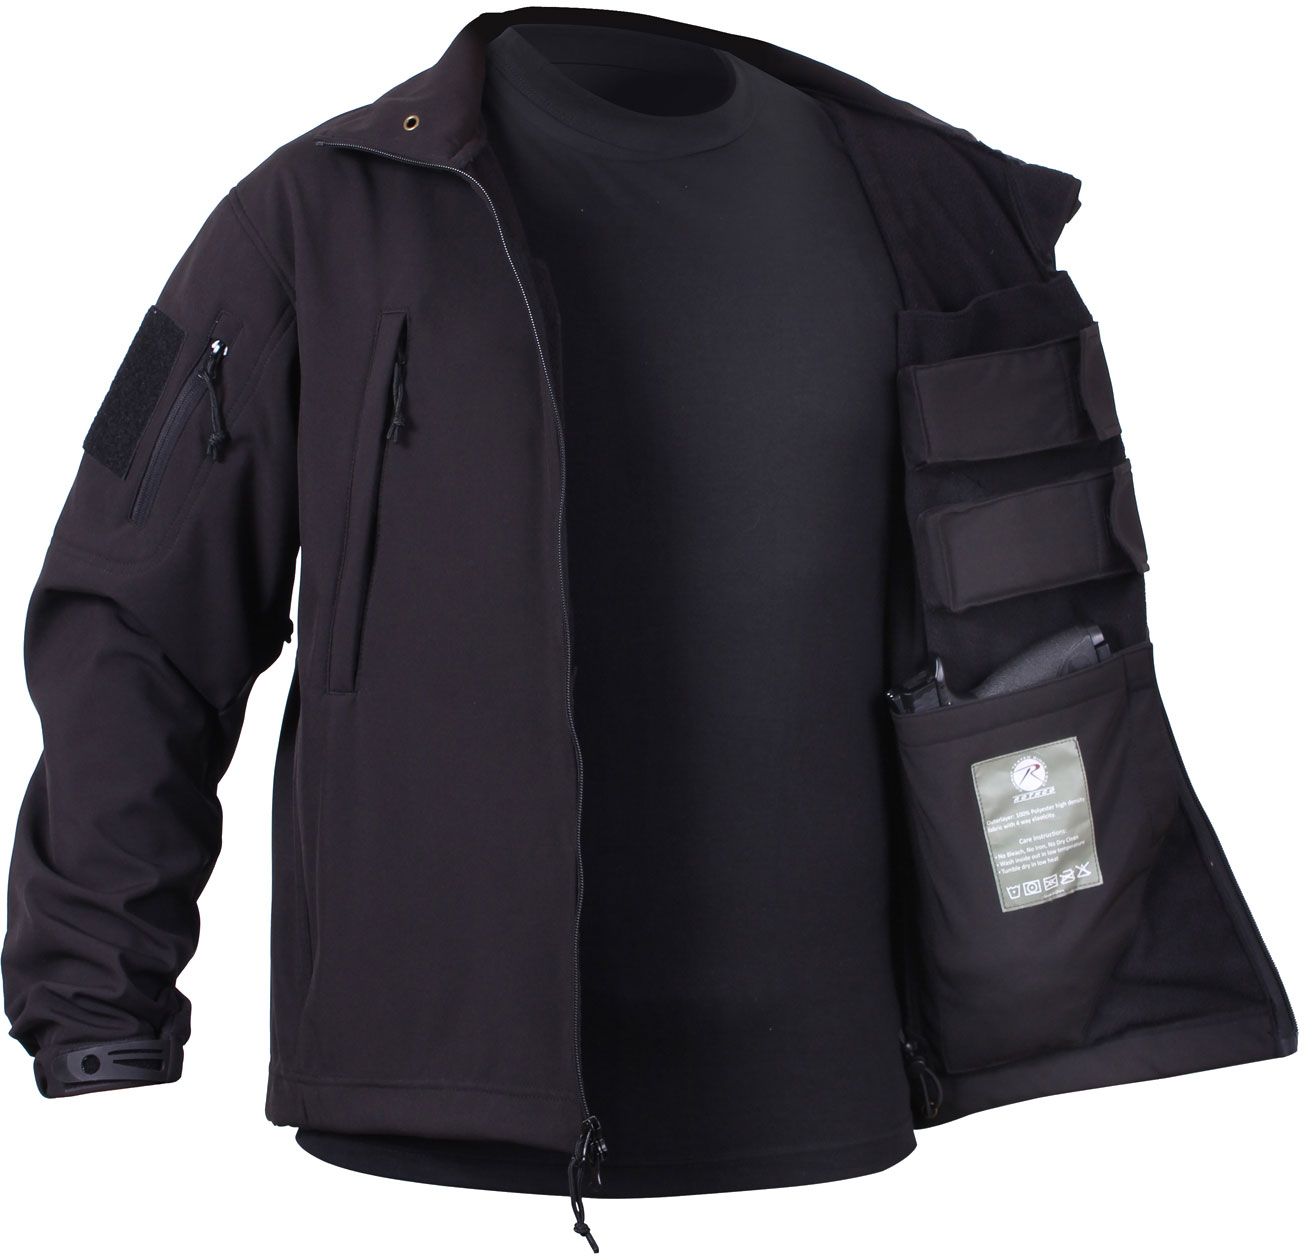 Rothco Black Concealed Carry Soft Shell Jacket